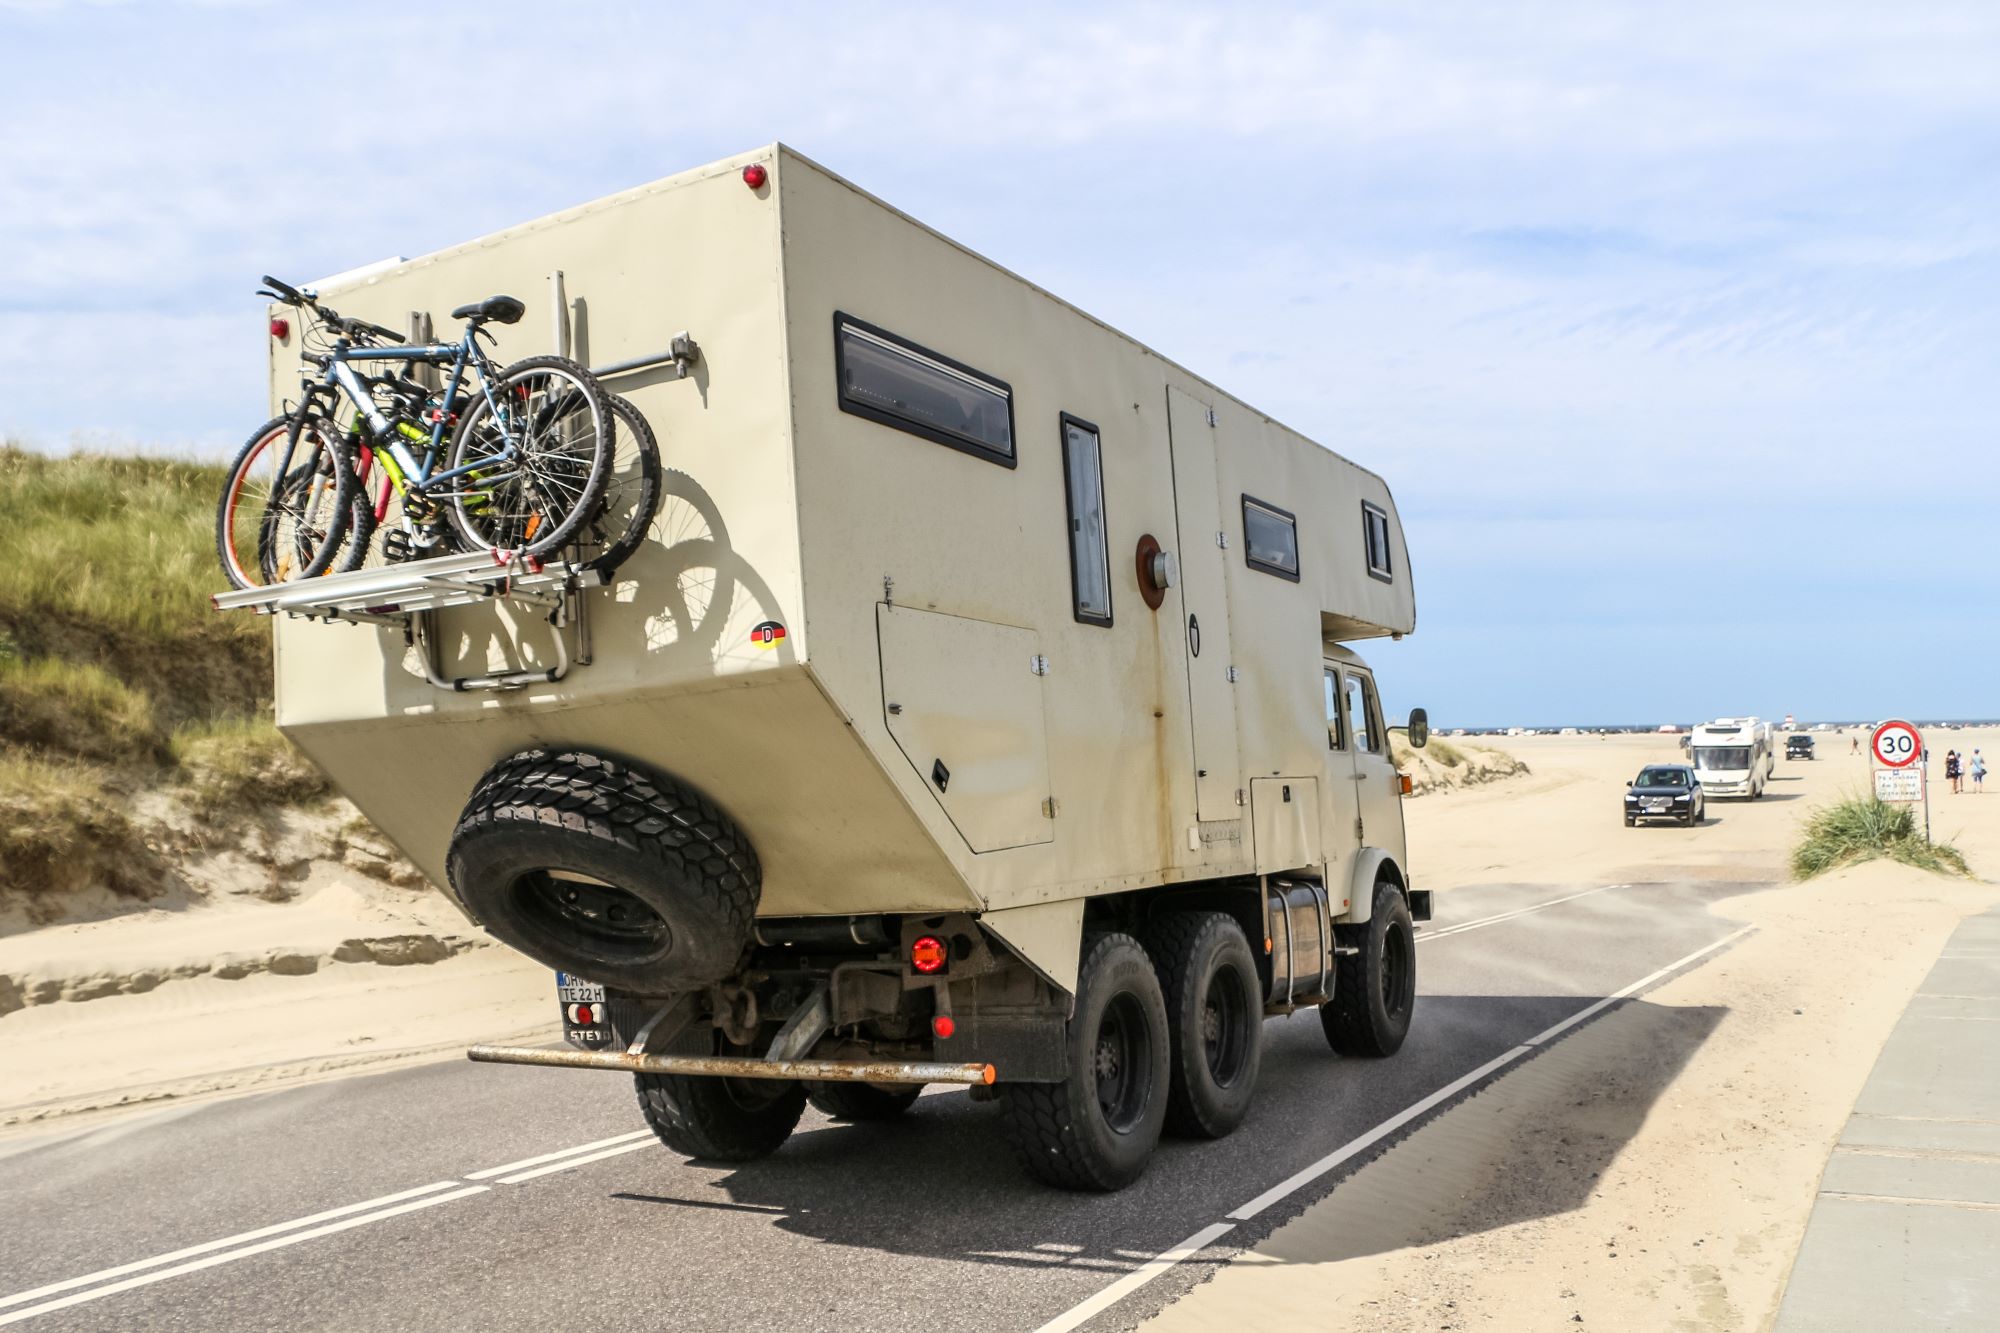 An RV Camper driving down a desert highway with bikes and a spare tire on its back